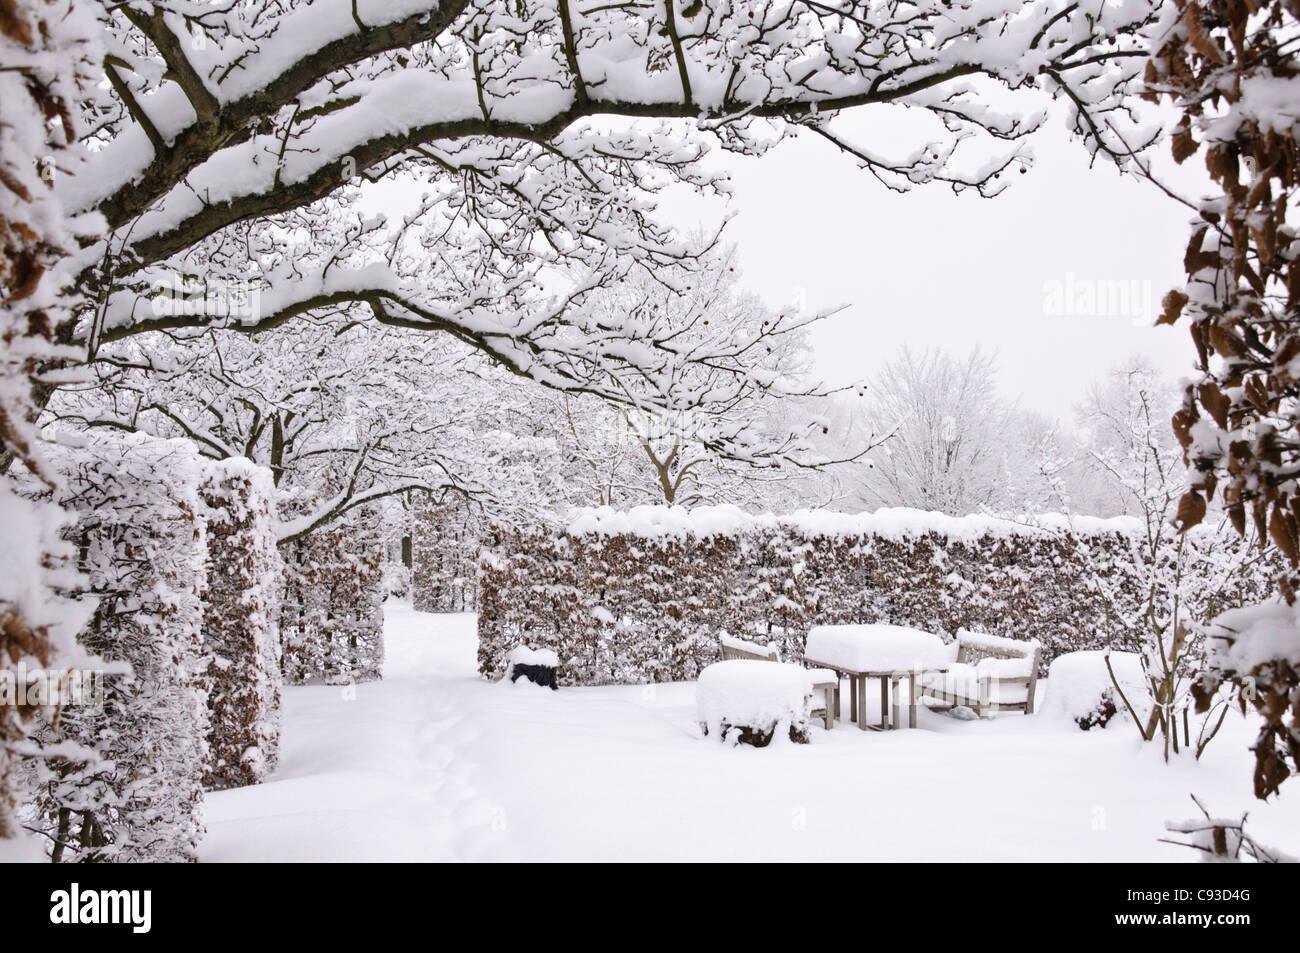 Snowy garden with seating area Stock Photo